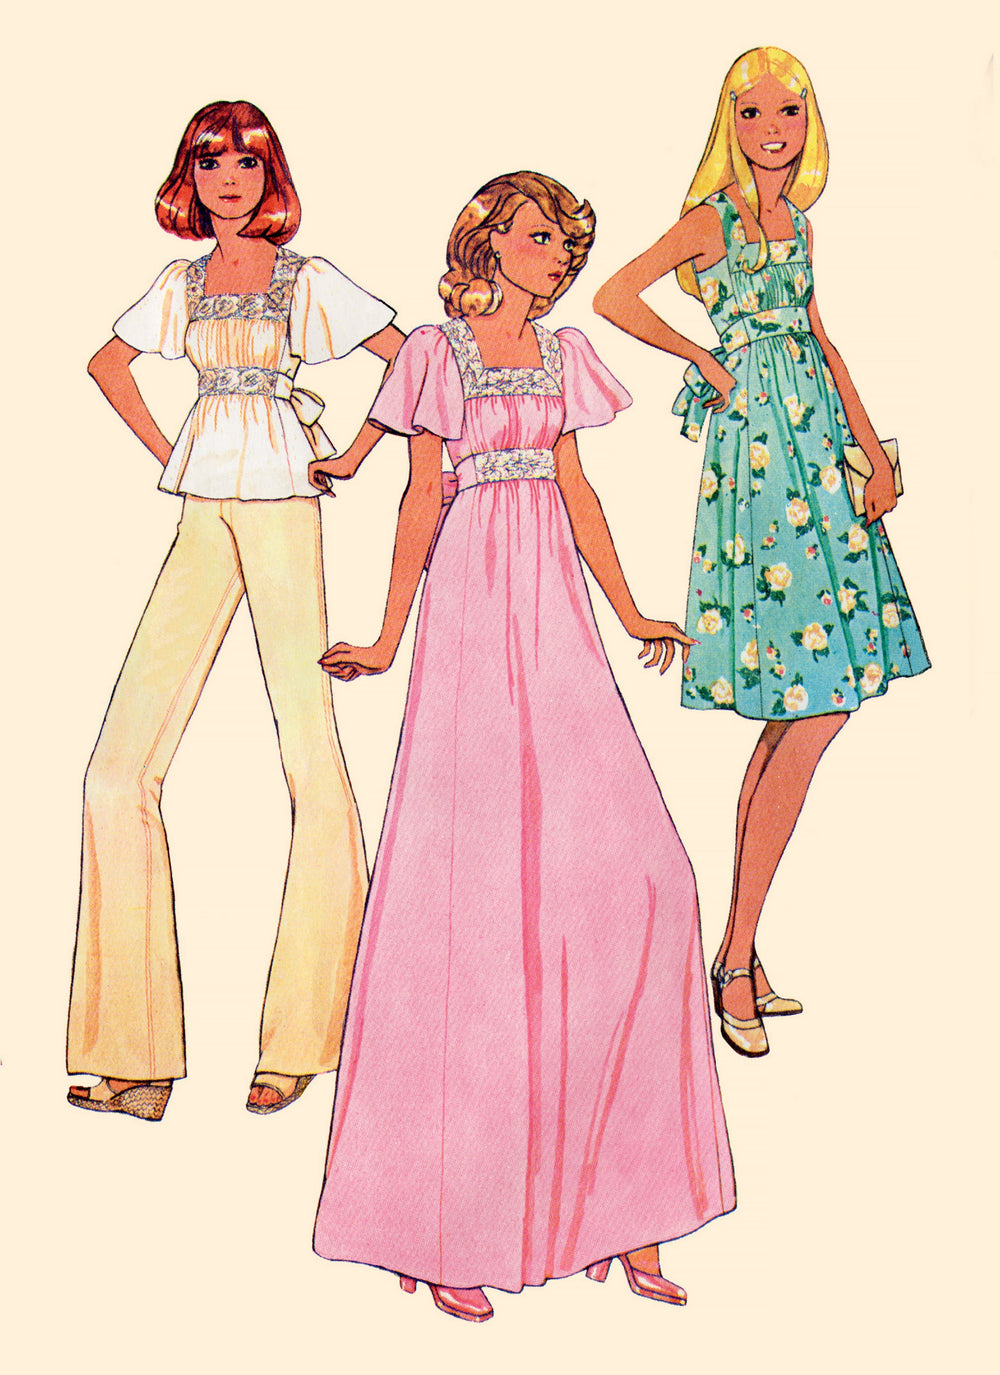 McCall's Sewing Pattern 8258 Vintage Dresses and Top from Jaycotts Sewing Supplies